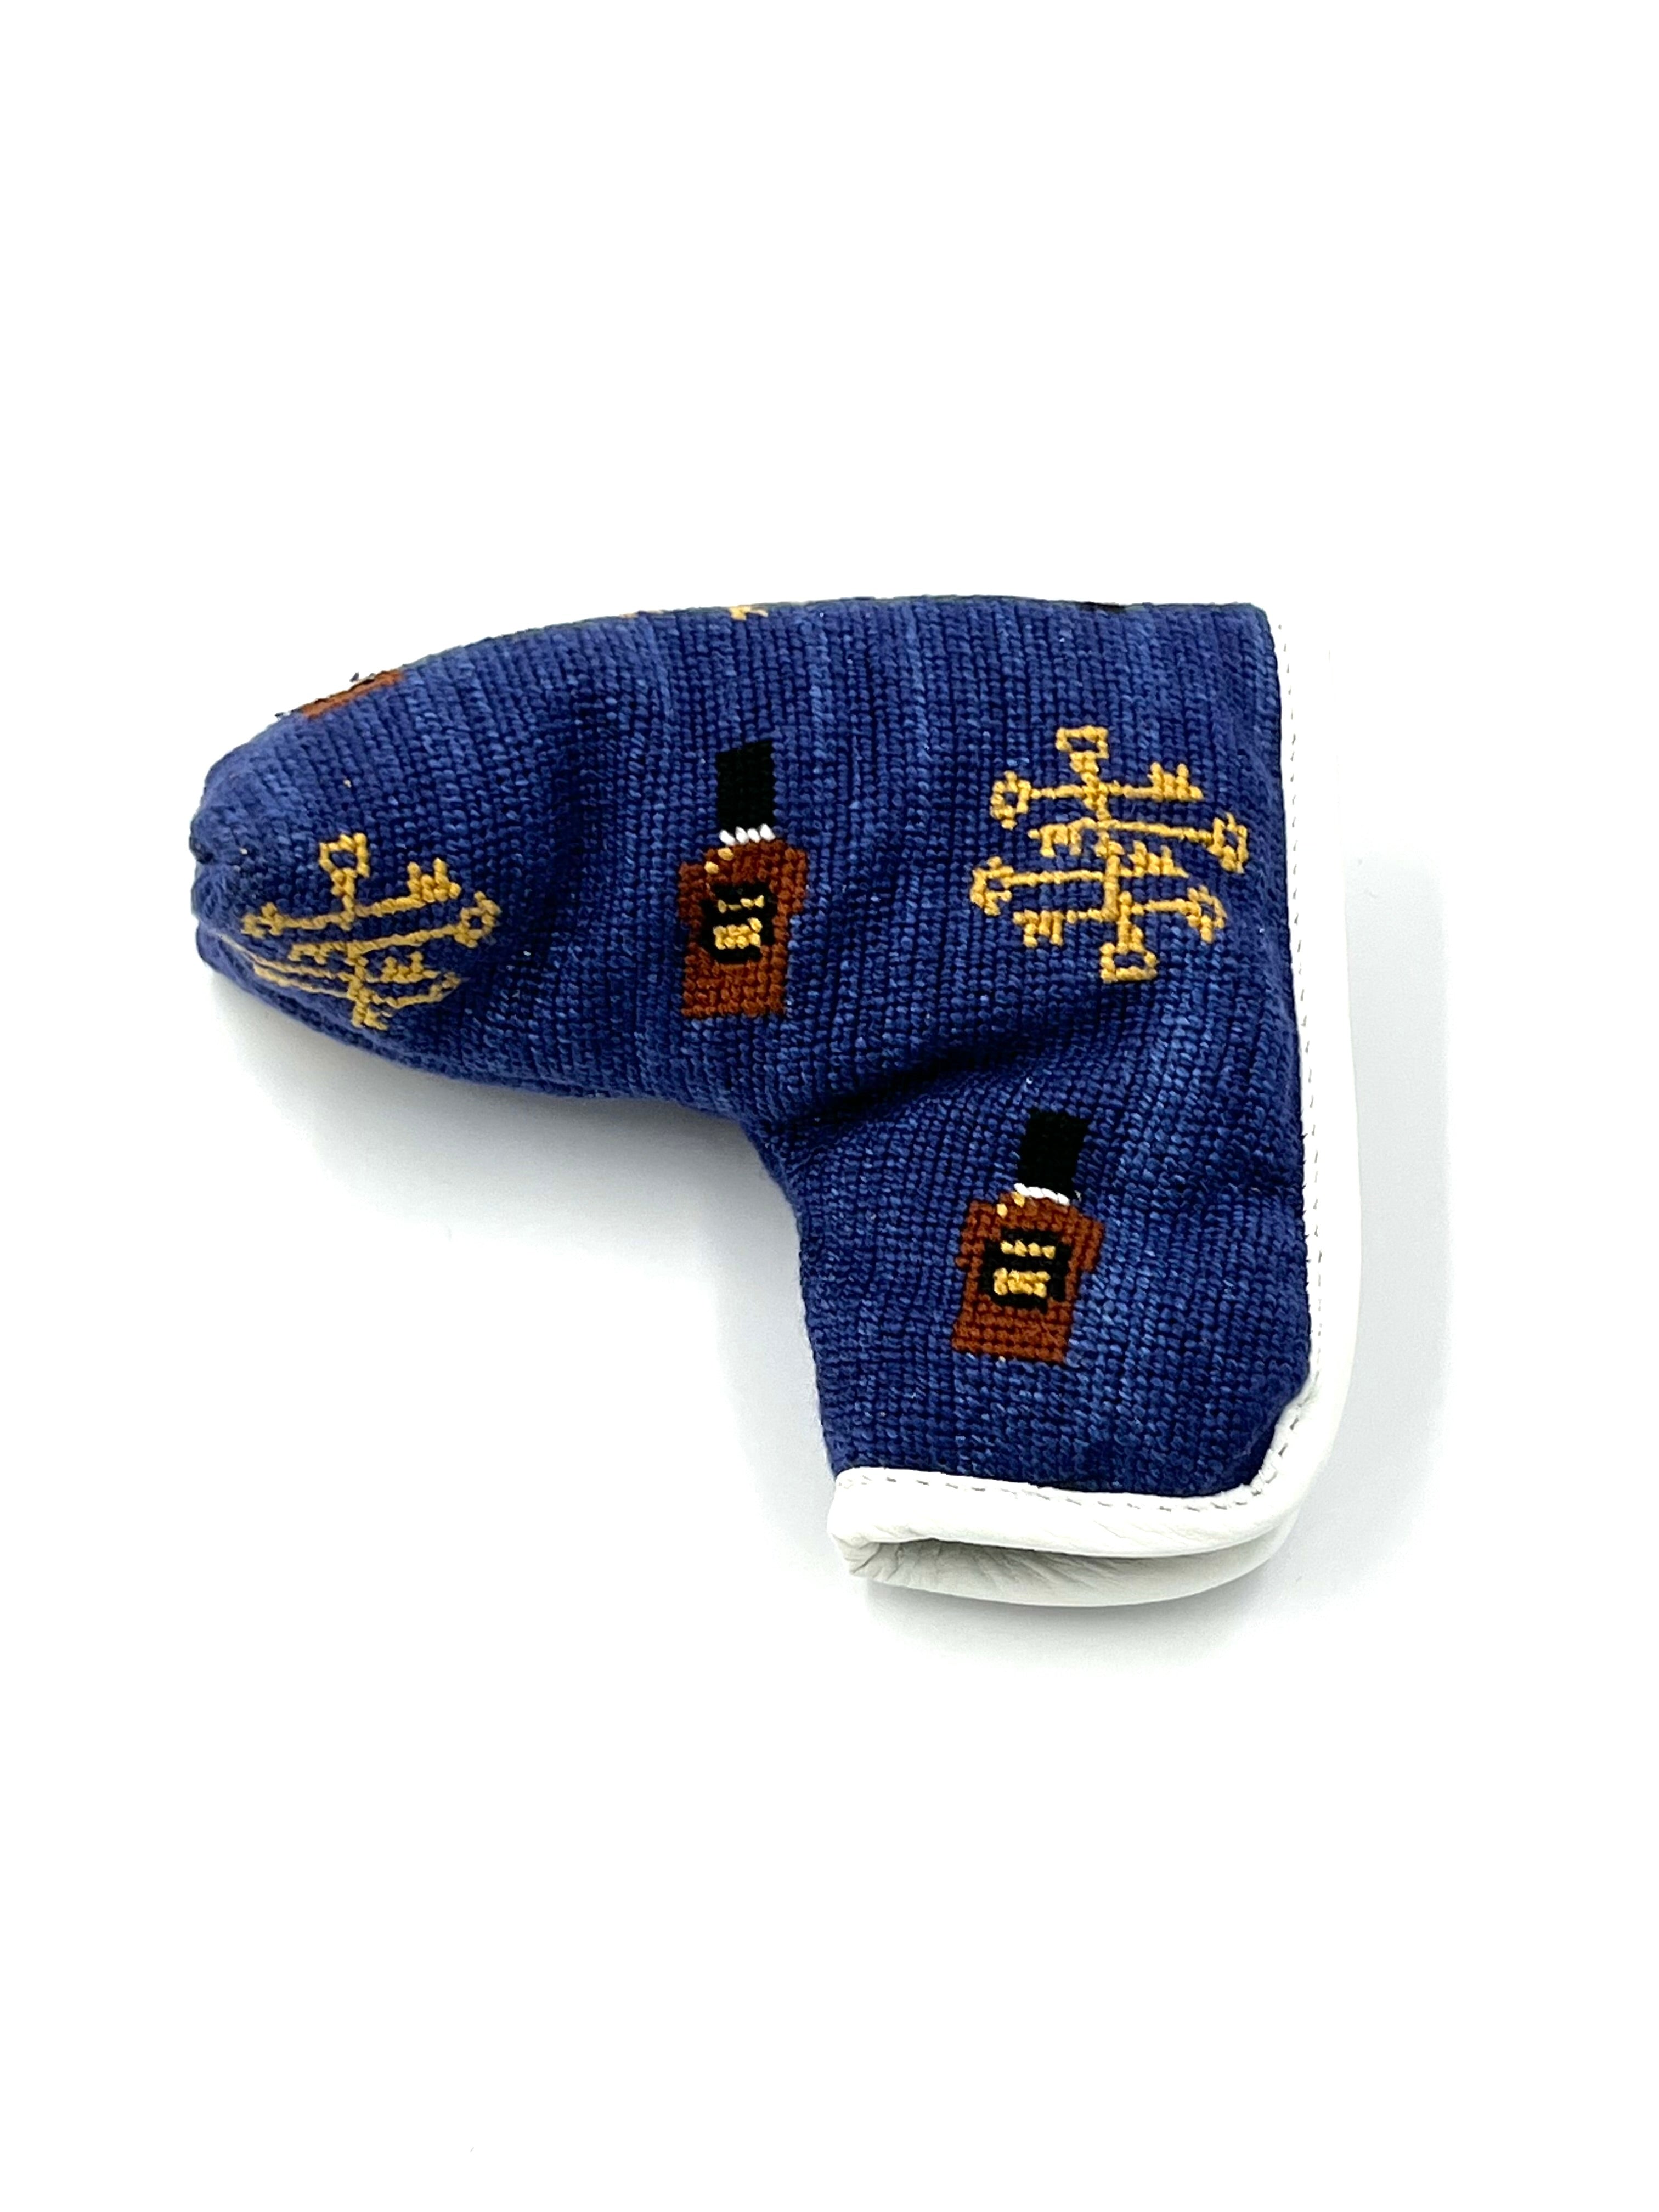 Needlepoint Putter Cover